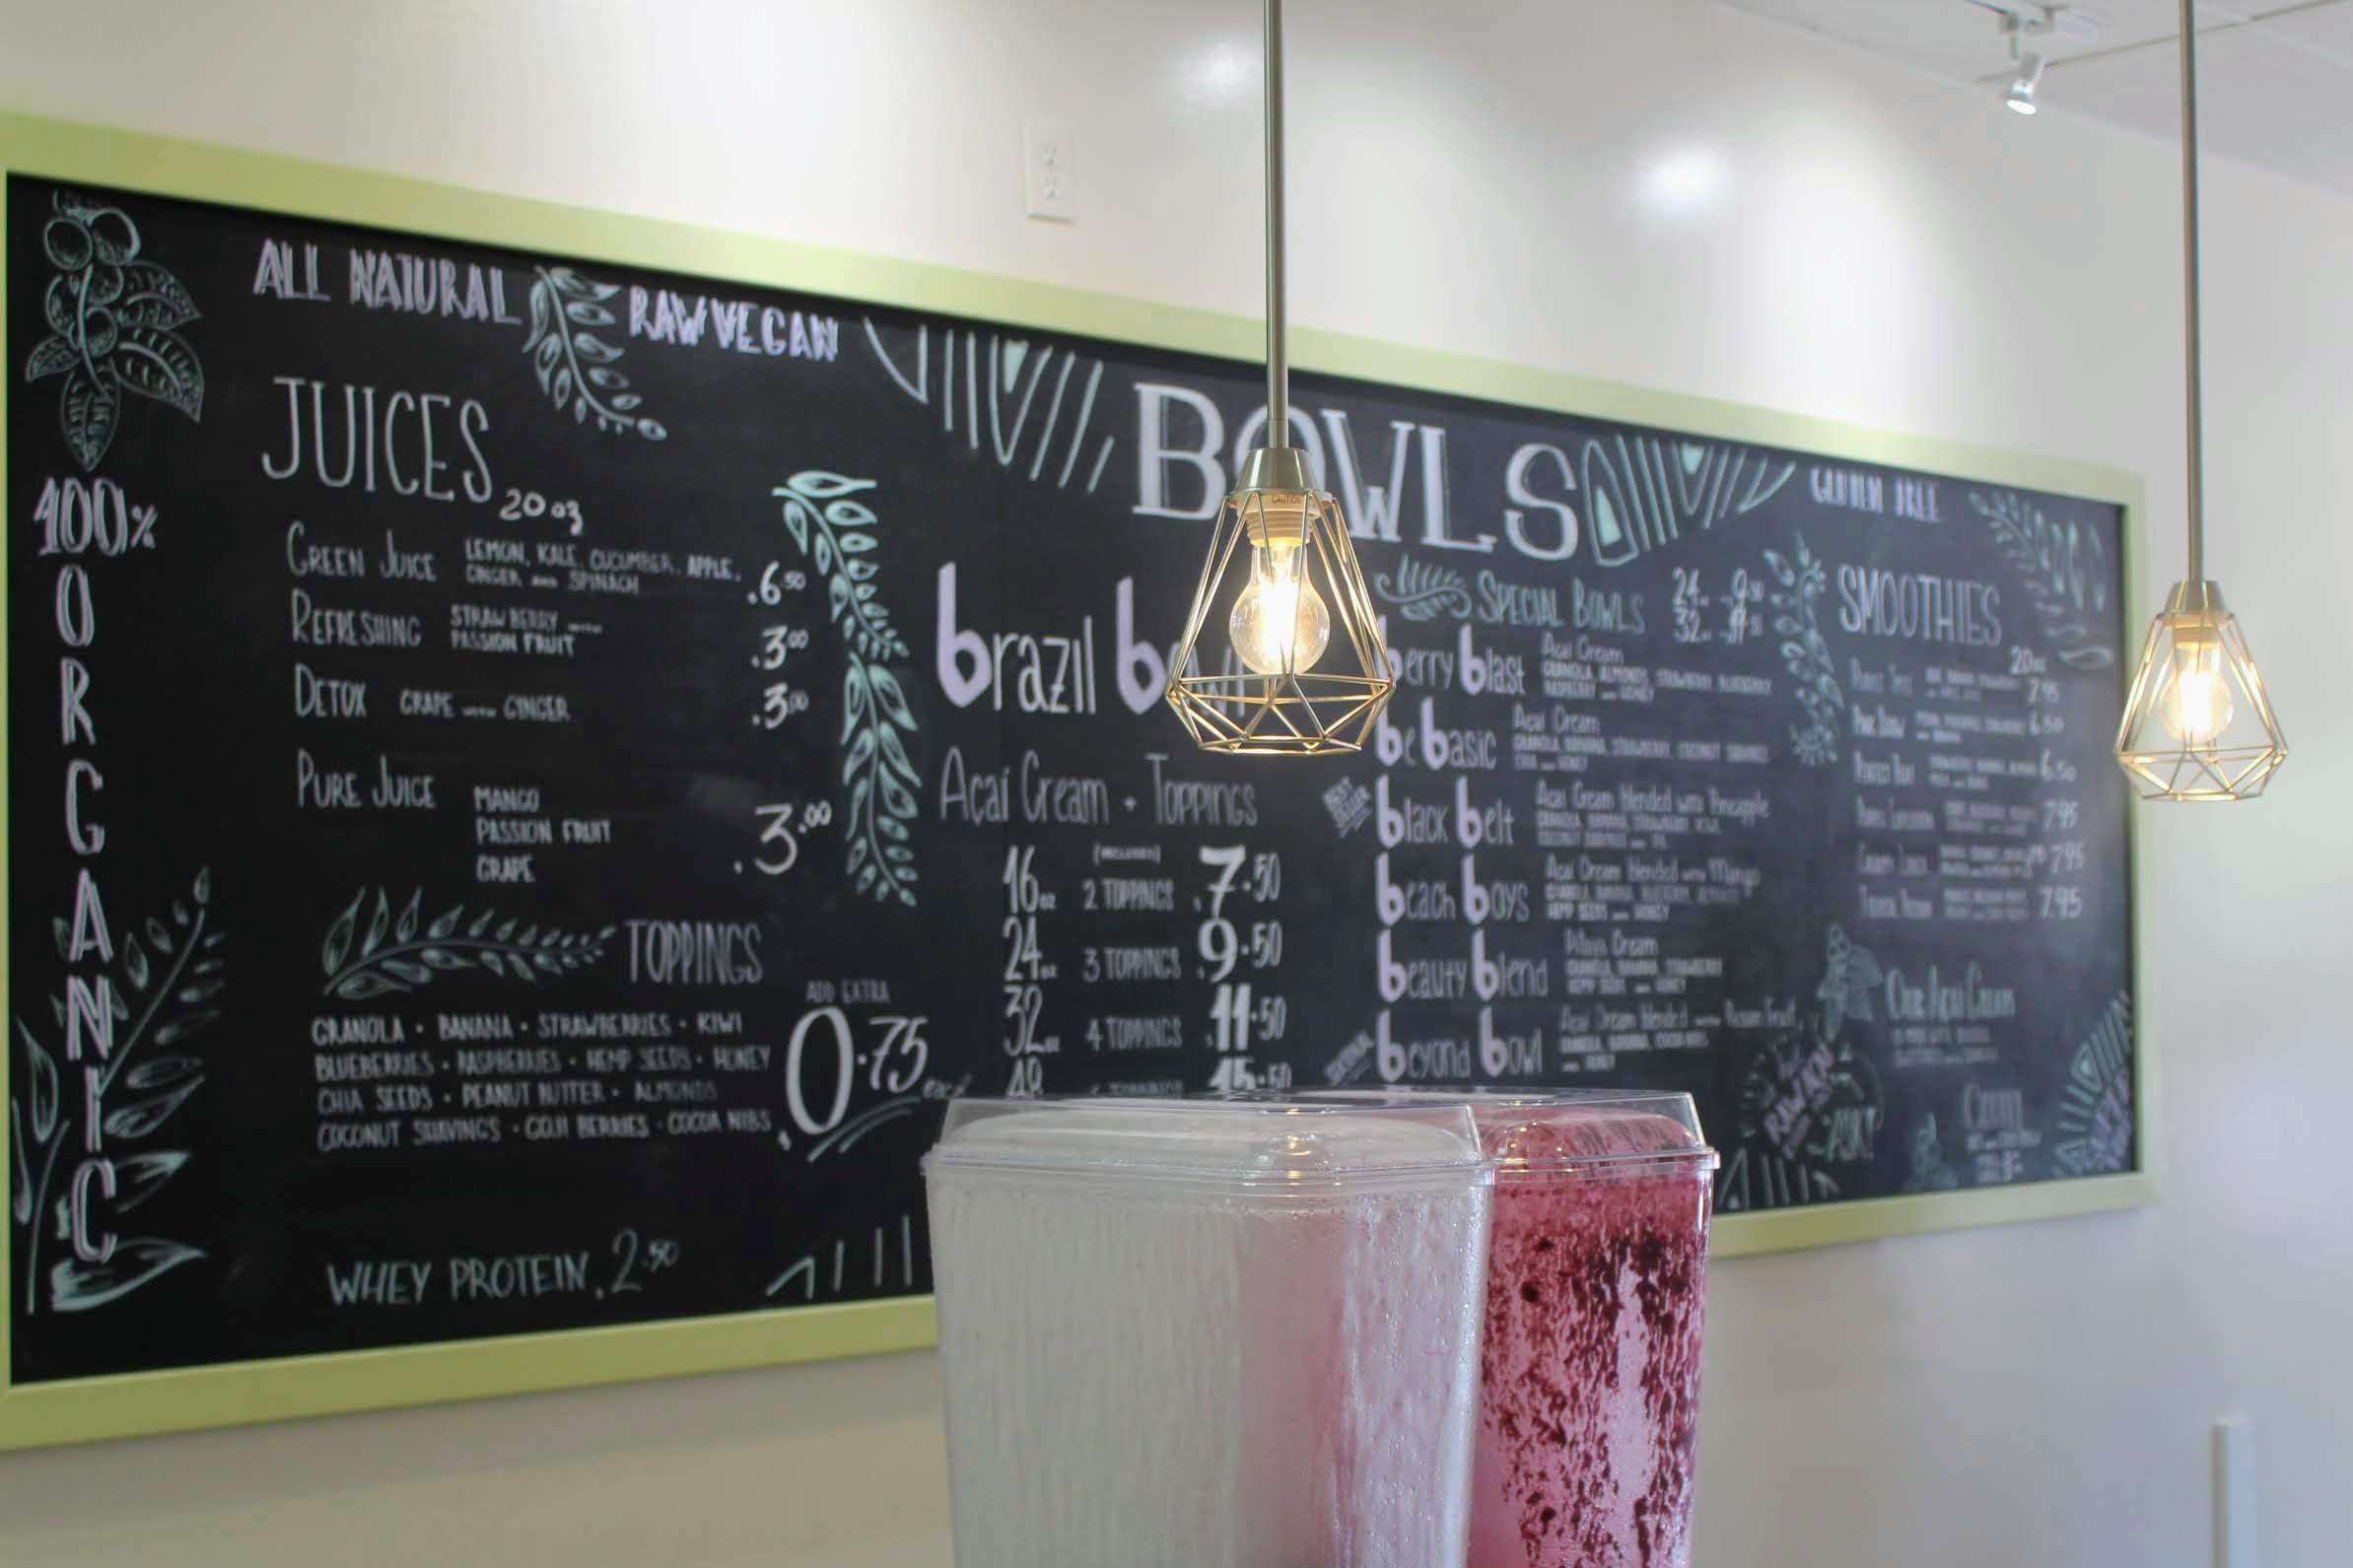 The chalkboard menu was designed by an artist from San Diego and boasts options beyond just açaí bowls, like smoothies and juices. Credit: Abby Sourwine / The Foothill Dragon Press